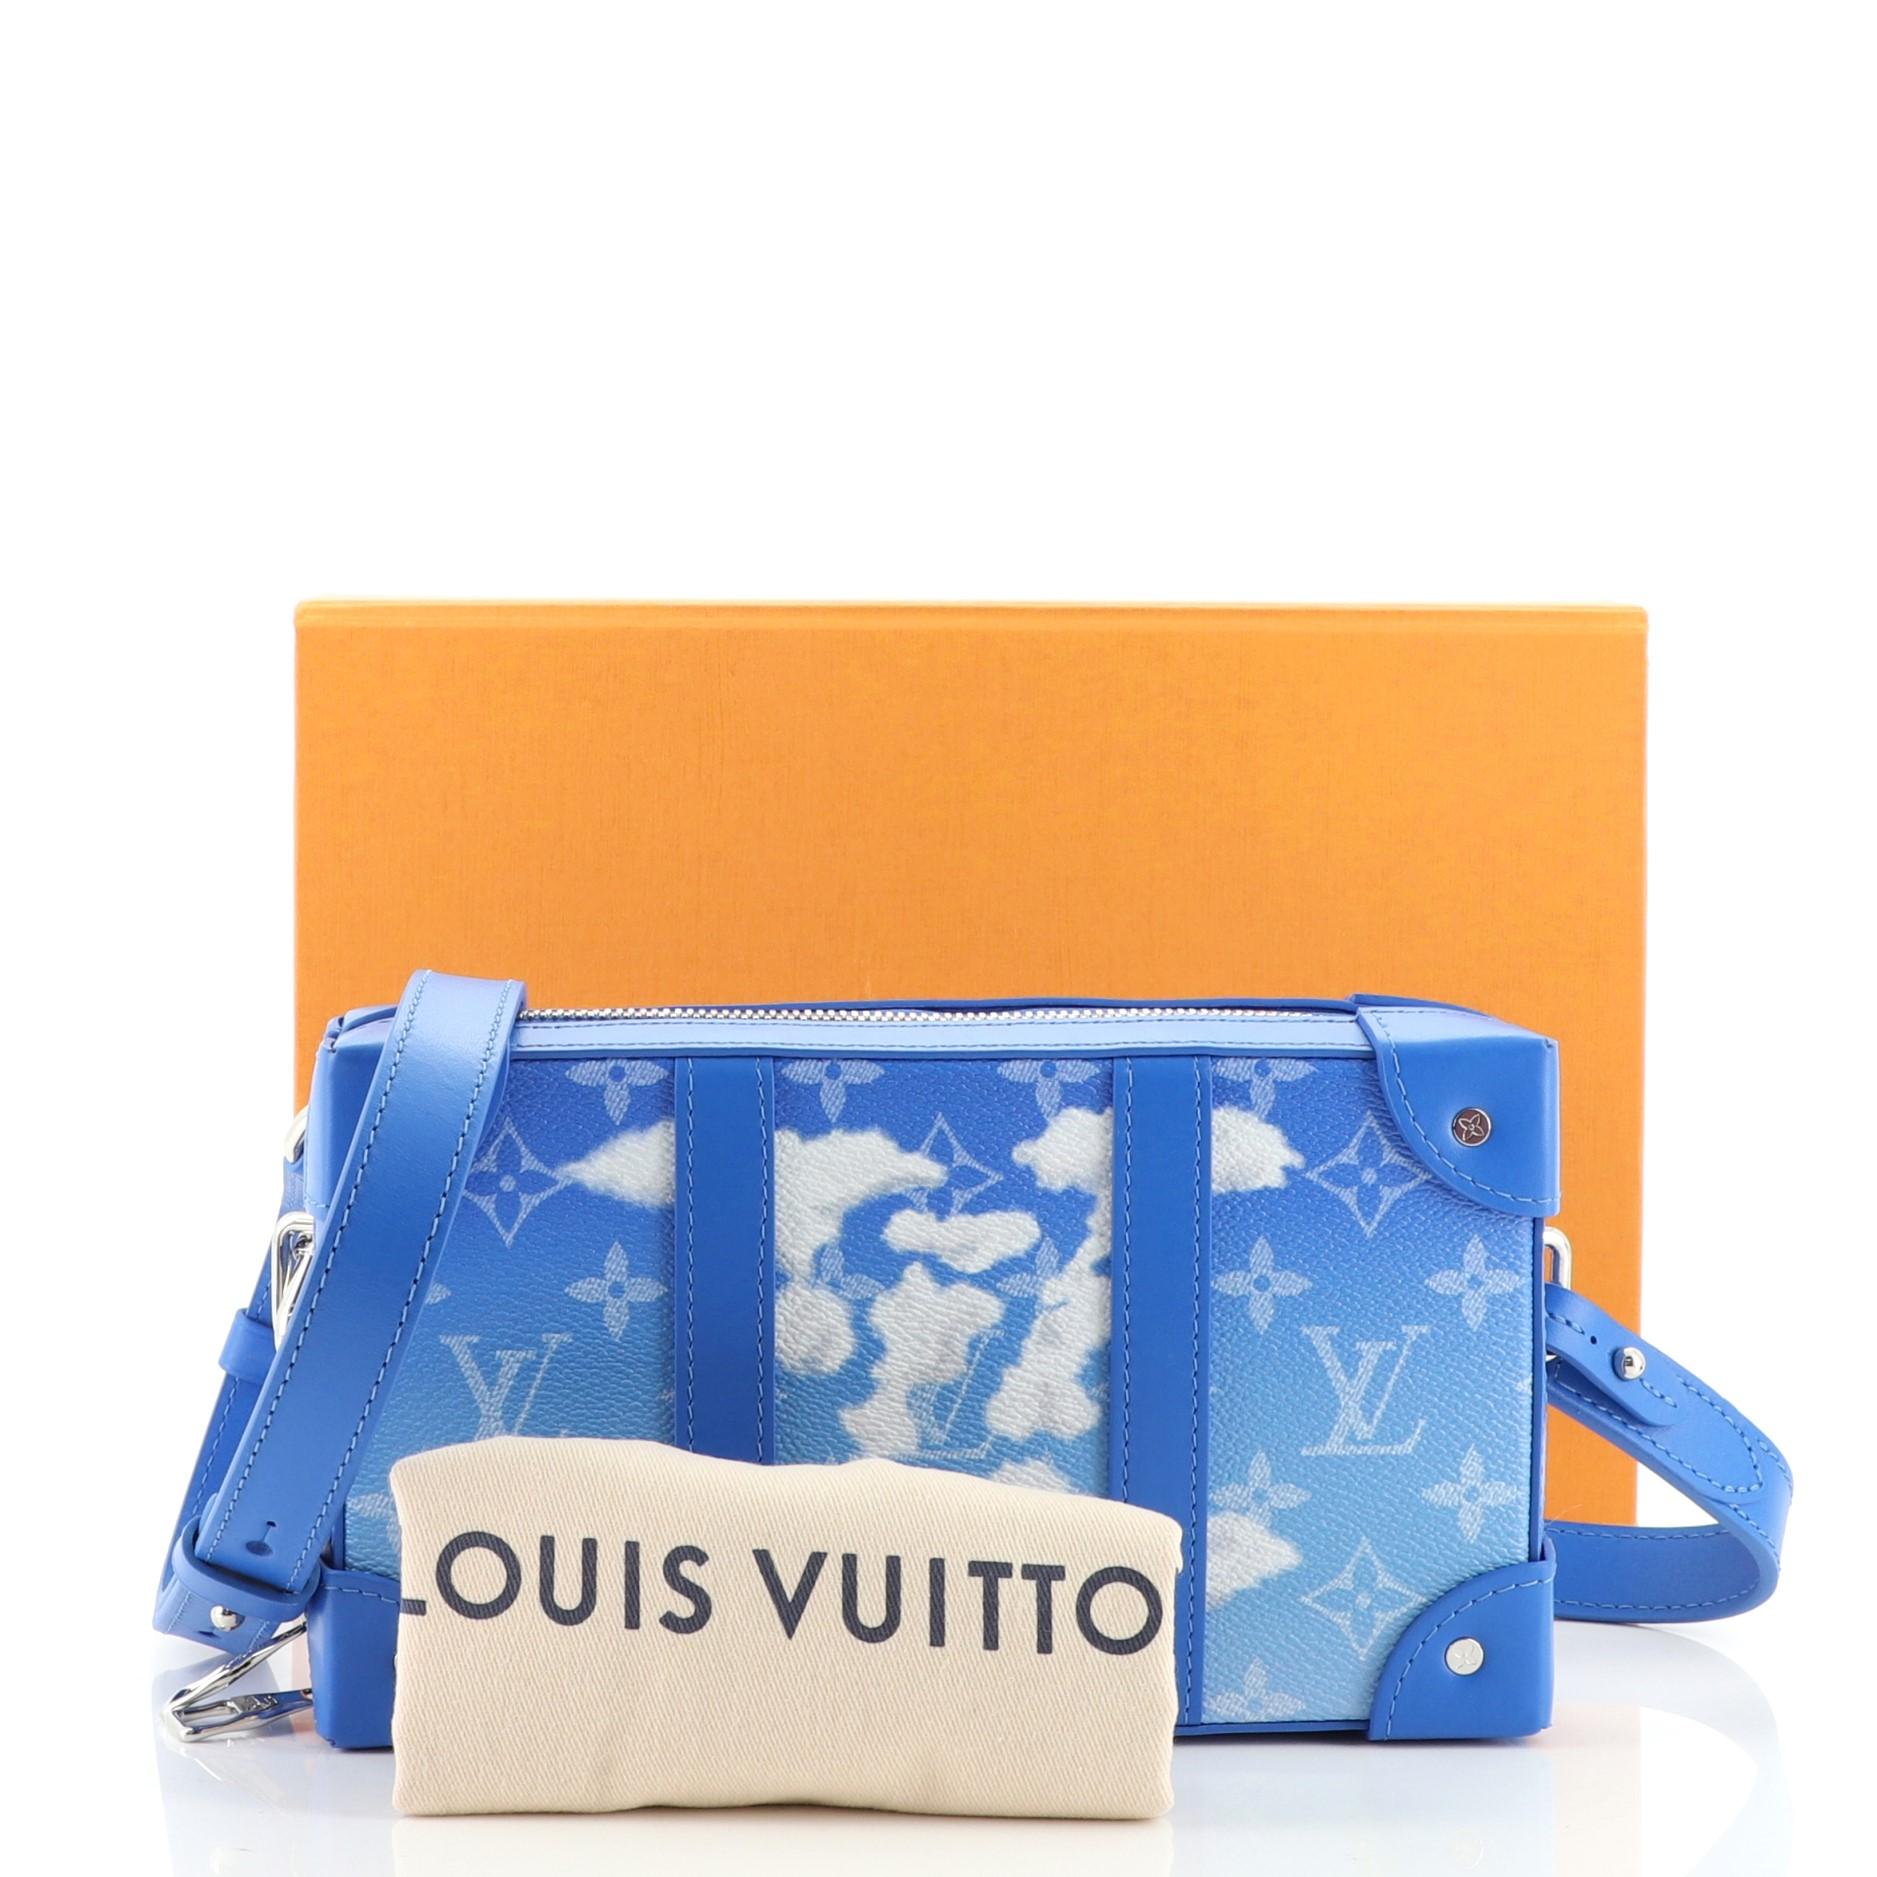 Louis Vuitton Virgil Abloh Blue Monogram Cloud Coated Canvas Soft Trunk Necklace Wallet Silver Hardware, 2020 (Like New), Contemporary Jewelry